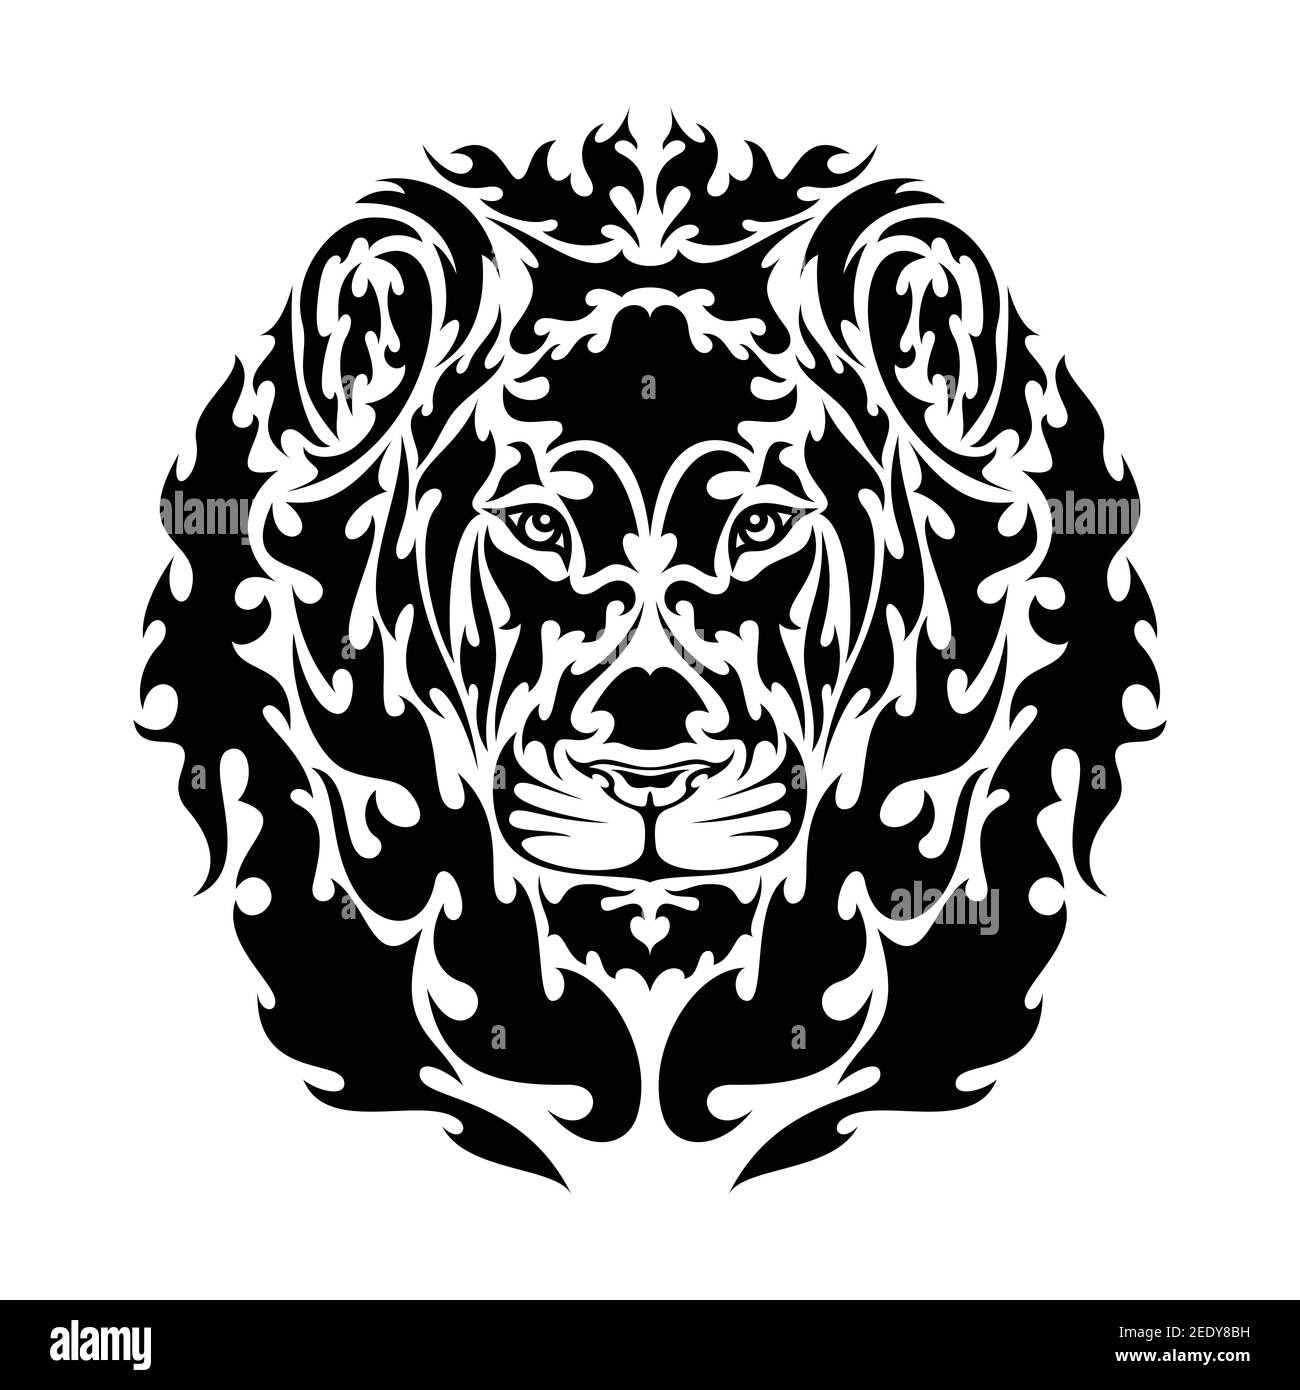 Hand drawn abstract portrait of a lion. Vector stylized illustration for tattoo, logo, wall decor, T-shirt print design or outwear. This drawing would Stock Vector